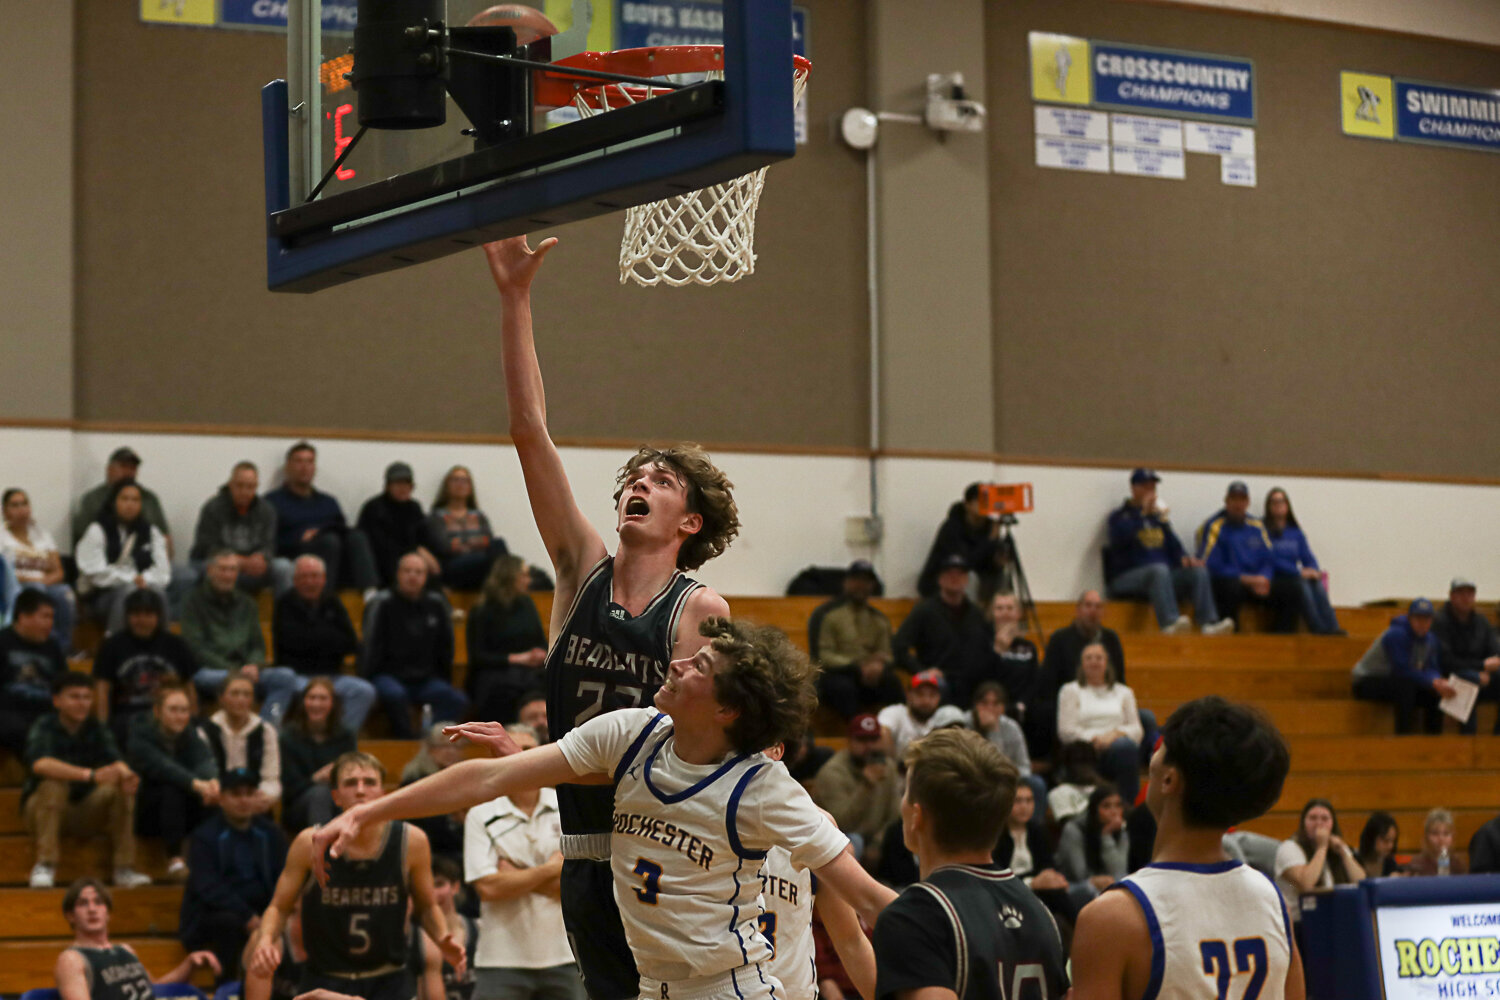 Dylan Rockey banks a layup in during W.F. West's win at Rochester on Dec. 5.